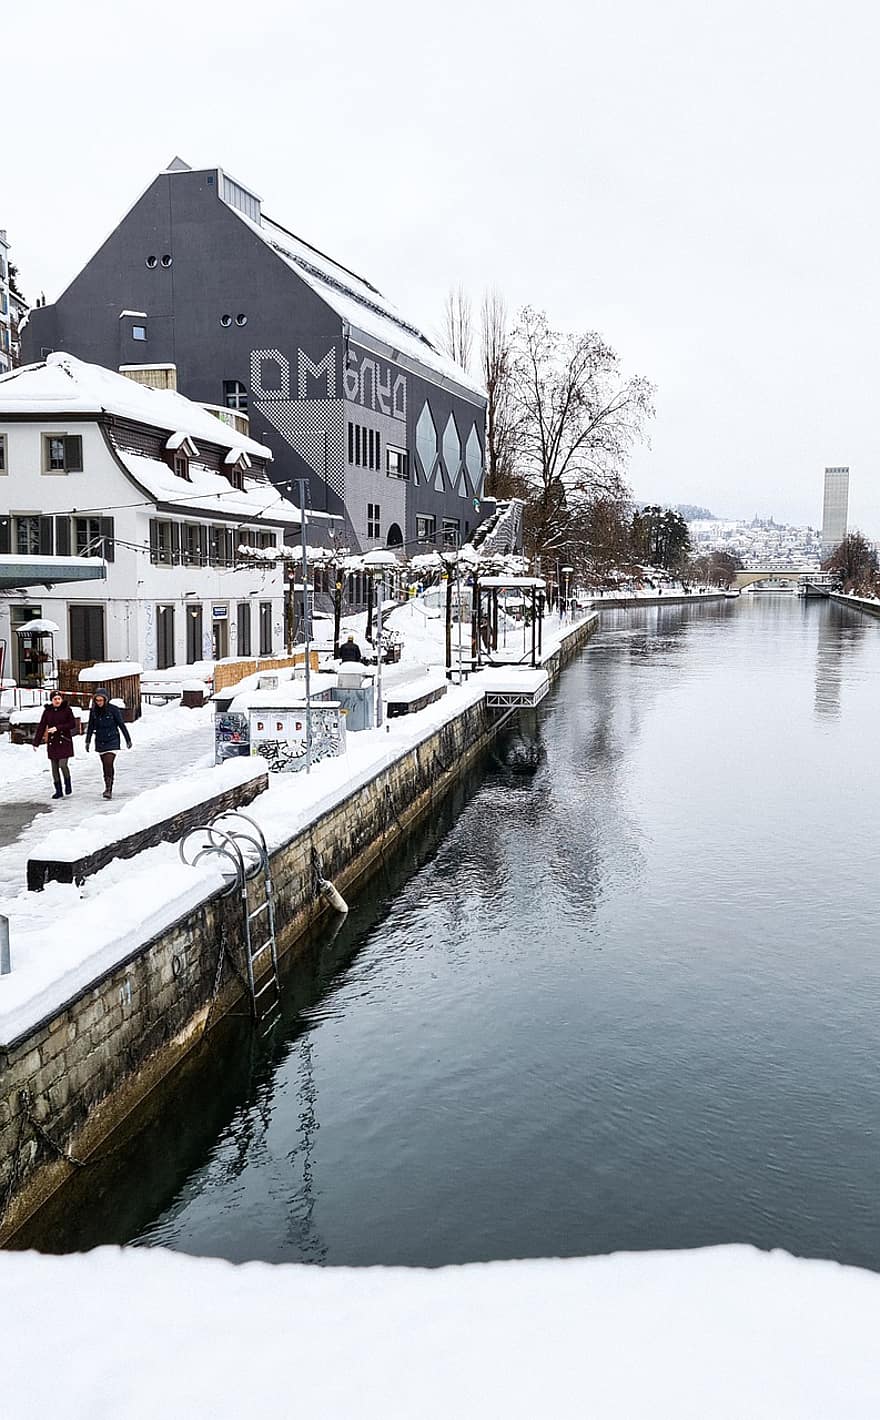 Snow, River, Buildings, Riverside, Couple, Walking, Winter Clothing, Winter Clothes, Snowy, Wintry, Hoarfrost